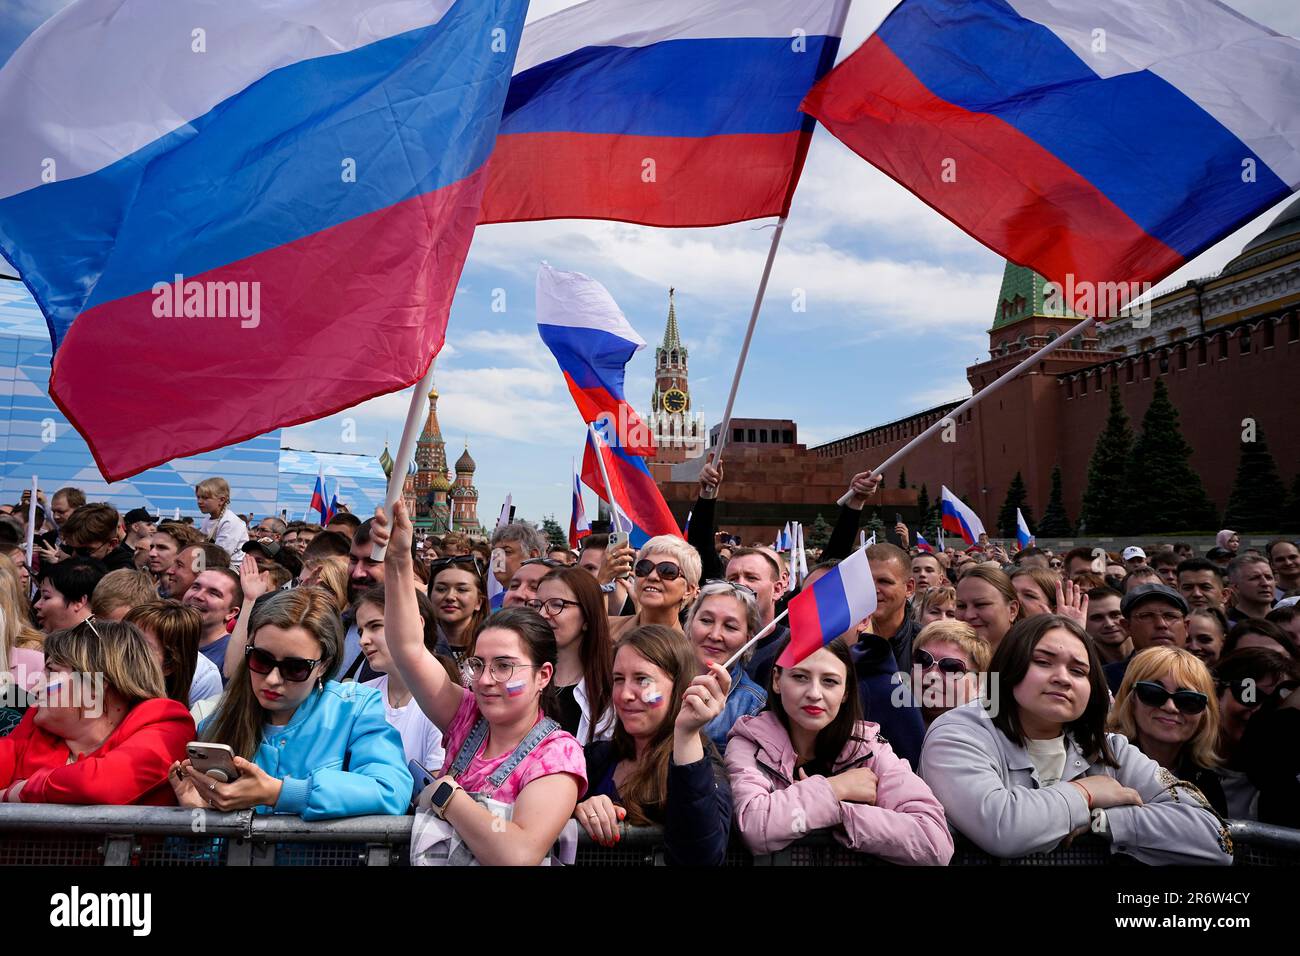 Russia celebrates National Flag Day today